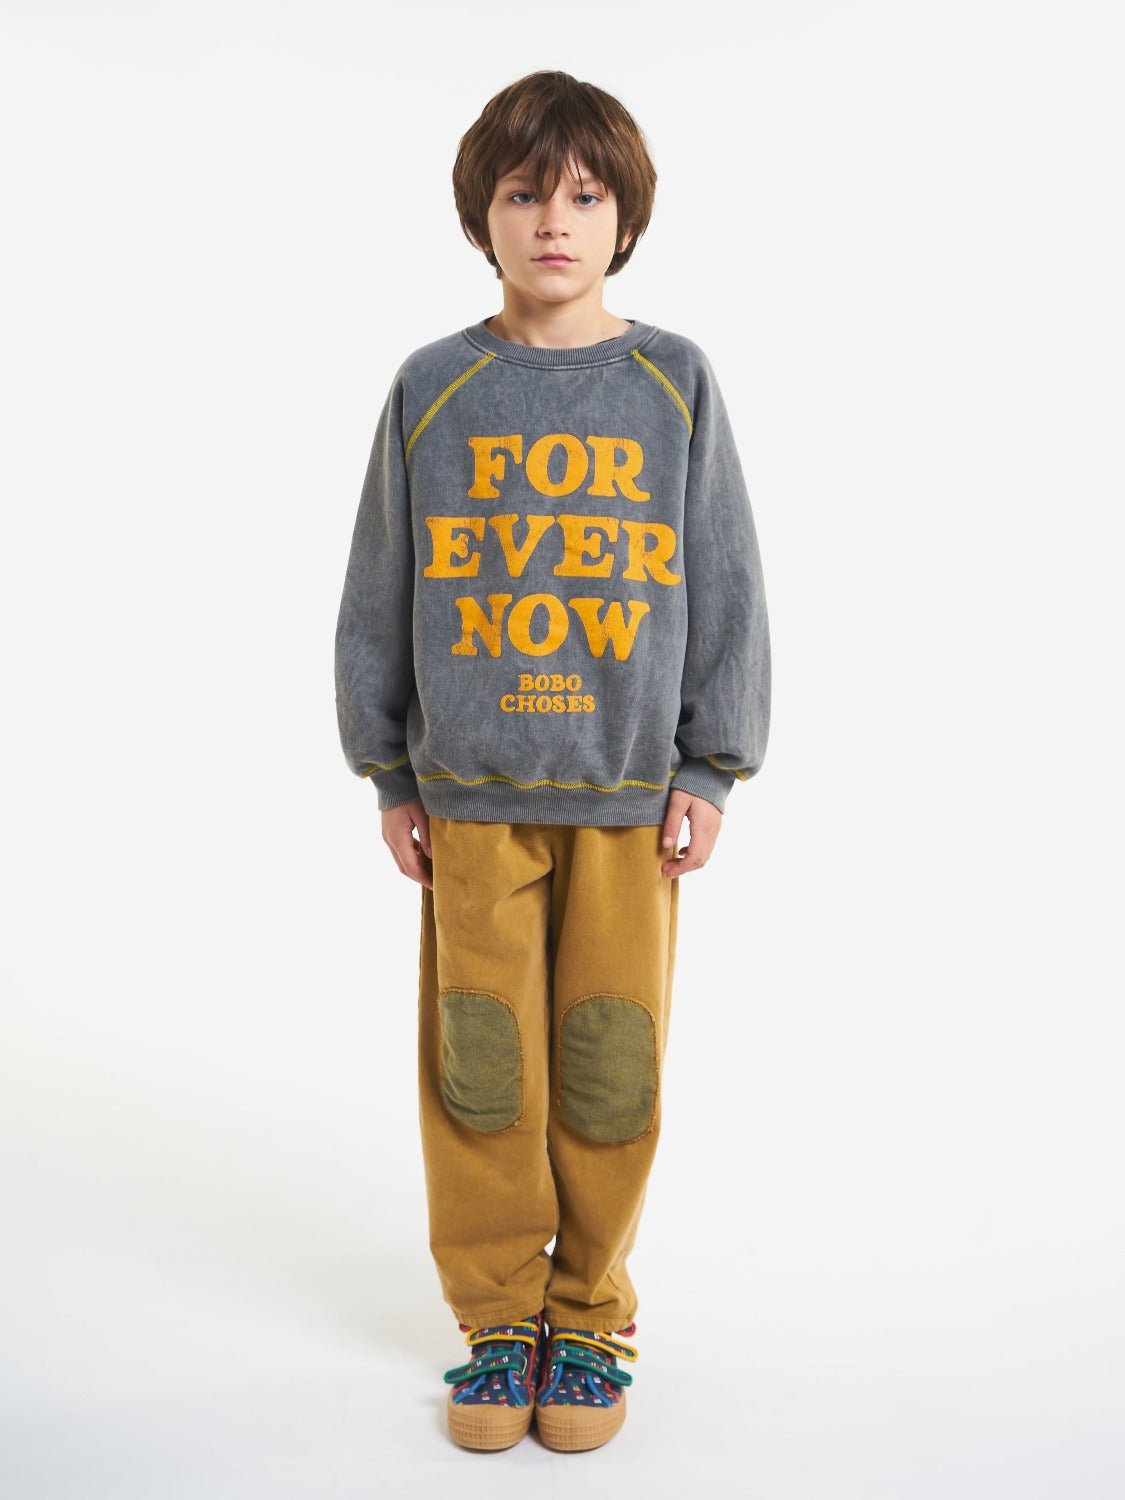 Forever Now Sweatshirt by Bobo Choses - Petite Belle